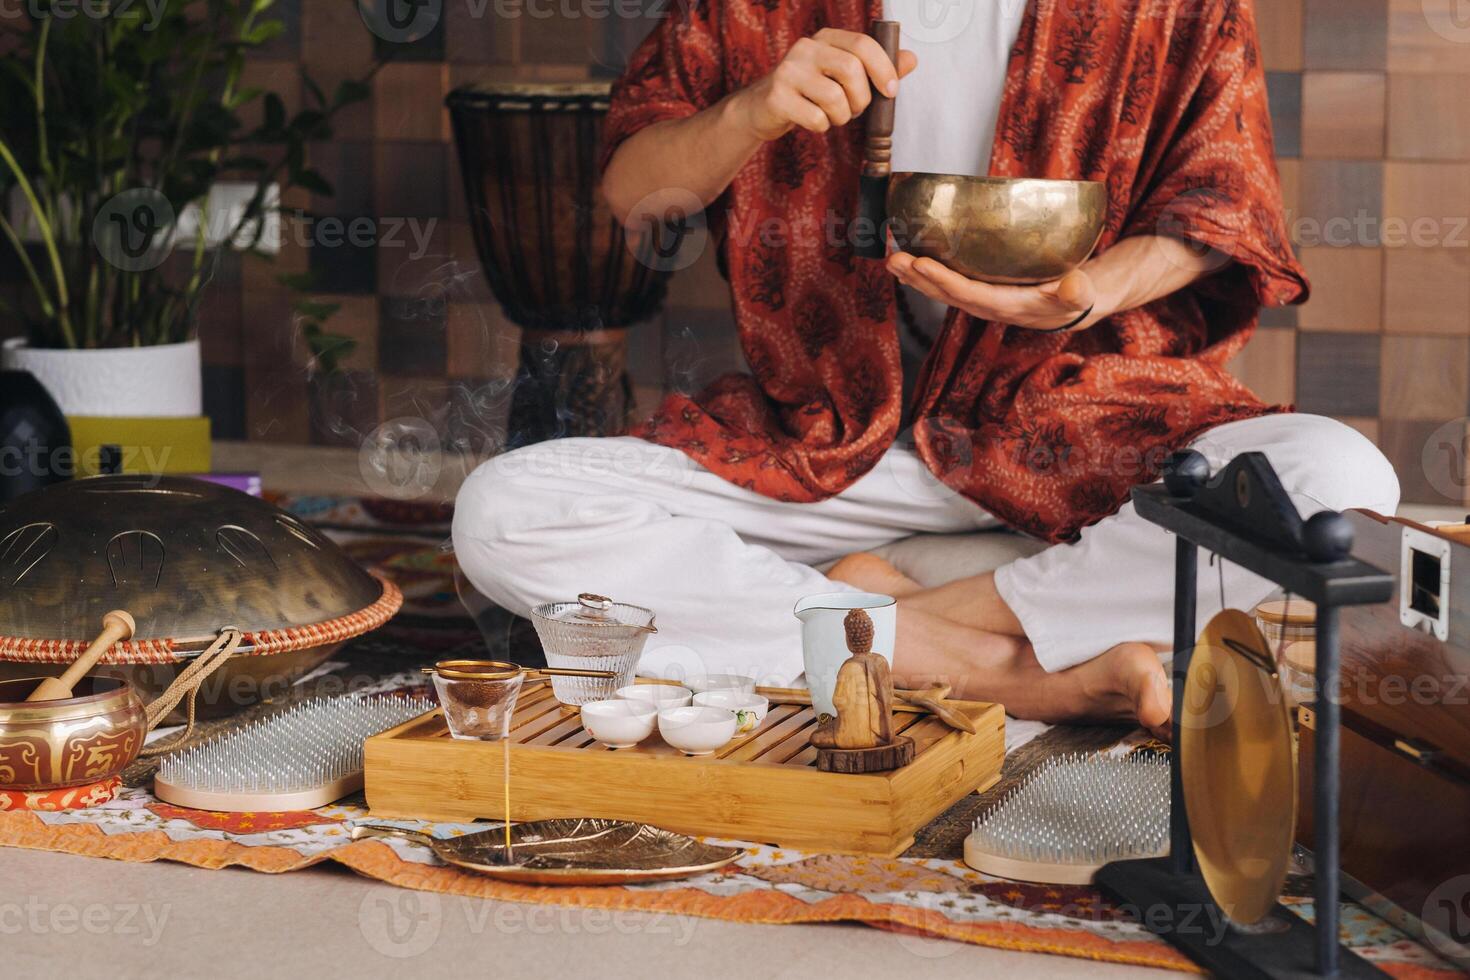 Tibetan singing bowl in the hands of a man during a tea ceremony photo